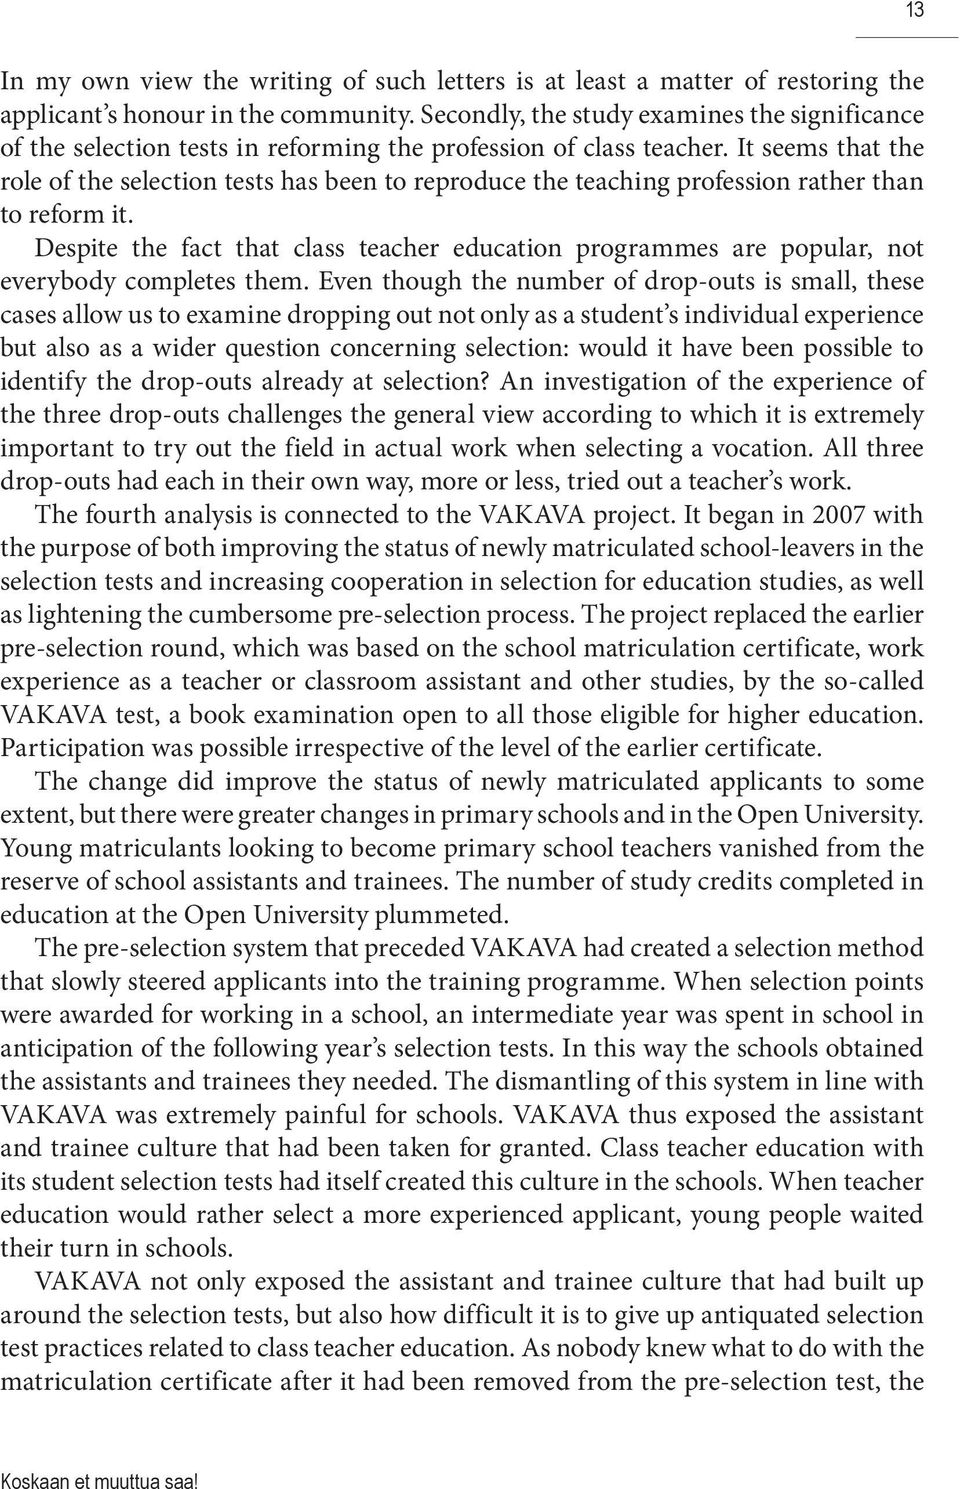 It seems that the role of the selection tests has been to reproduce the teaching profession rather than to reform it.